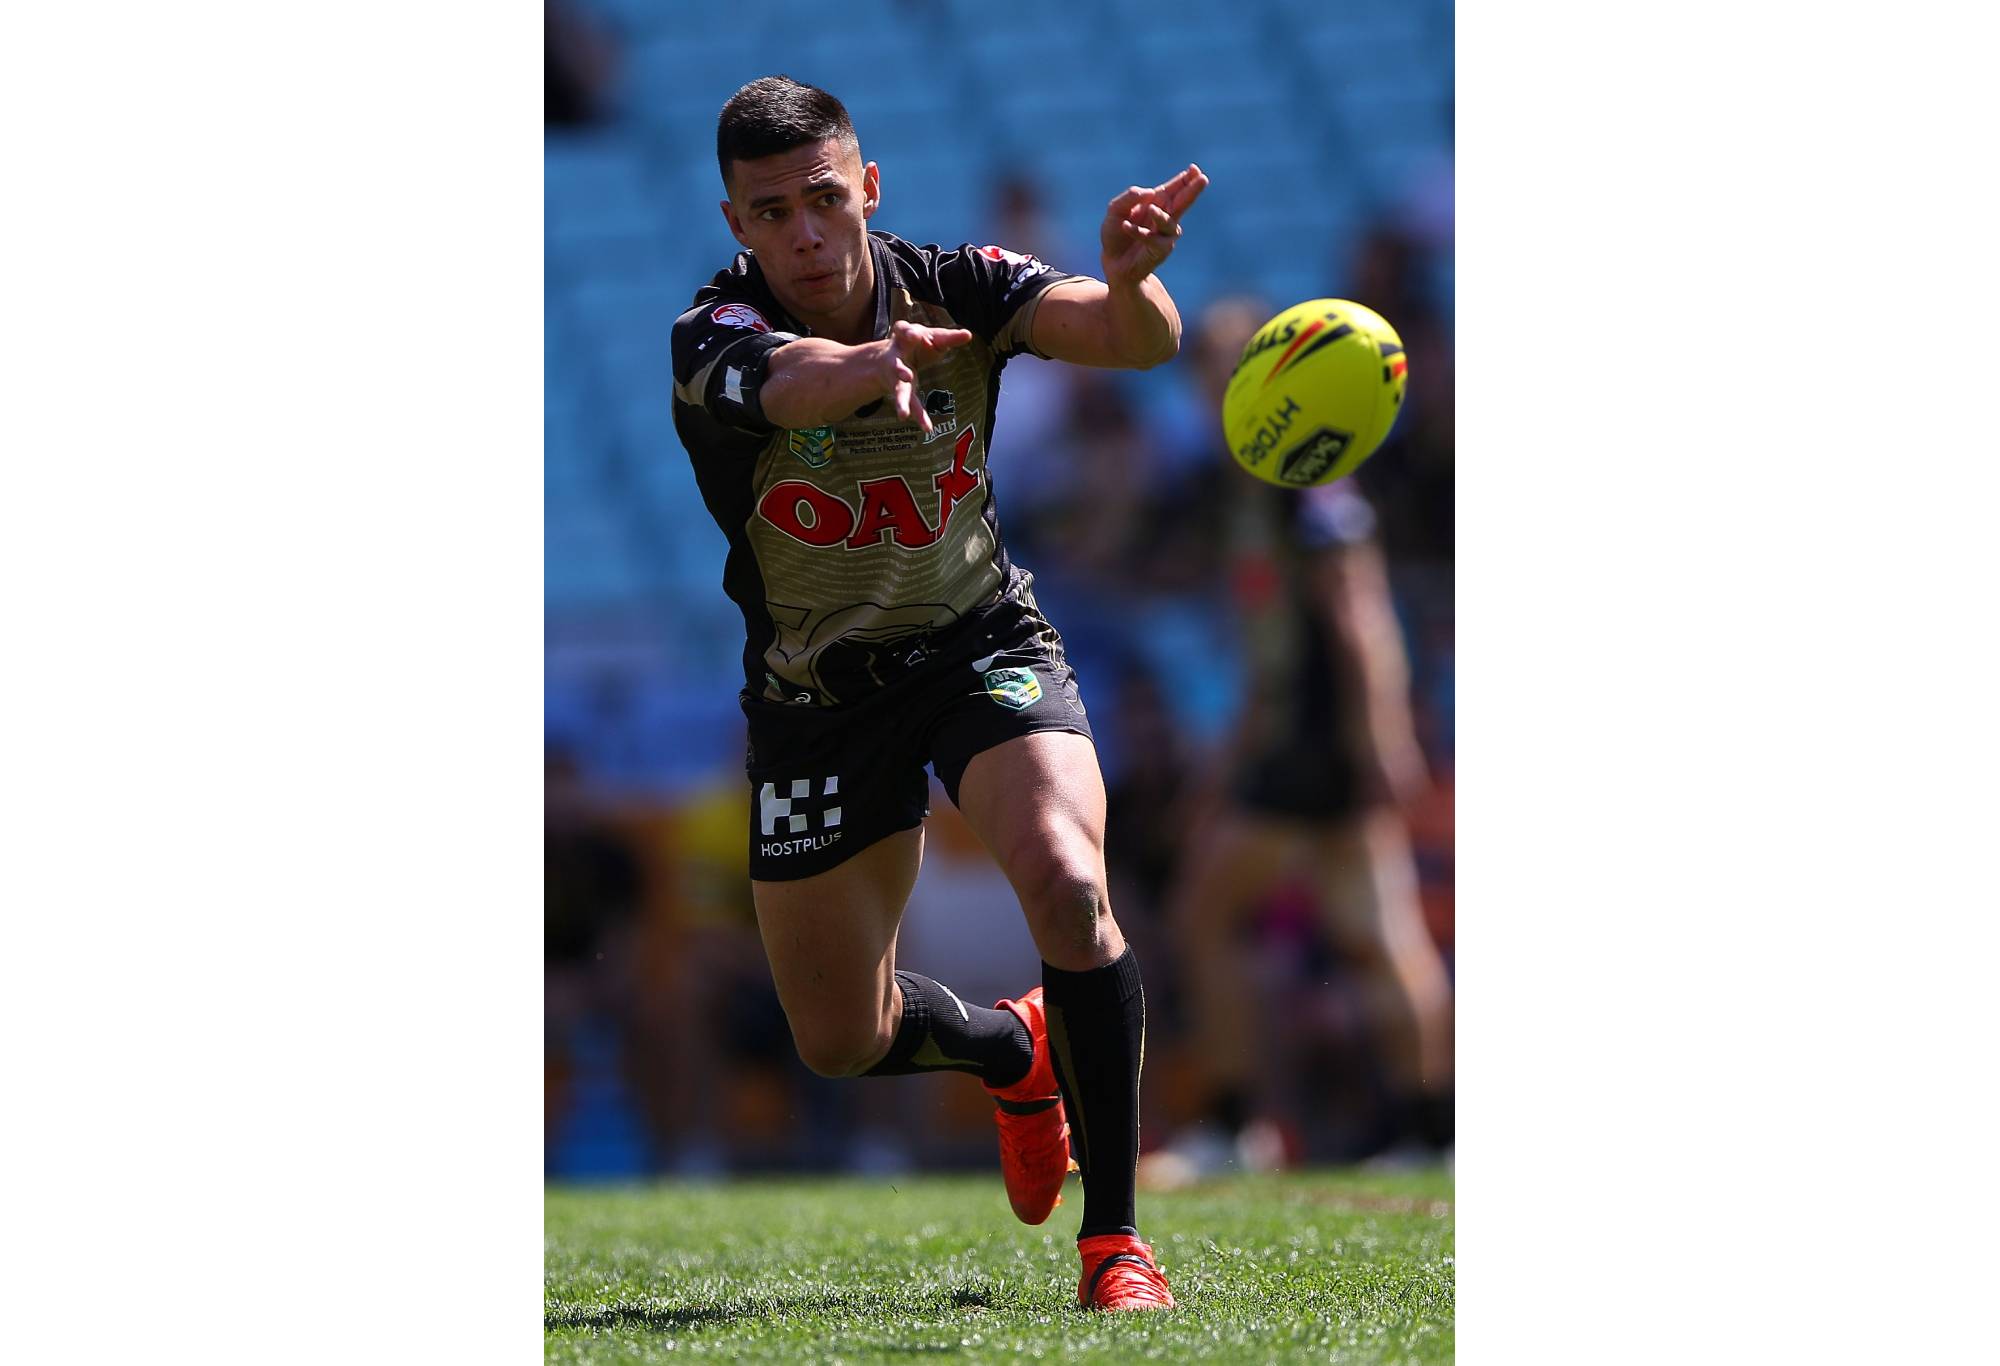 SYDNEY, AUSTRALIA - OCTOBER 02:  Soni Luke of the Panthers passes the ball during the 2016 Holden Cup U20's Grand Final match between the Penrith Panthers and Sydney Roosters at ANZ Stadium on October 2, 2016 in Sydney, Australia.  (Photo by Matt Blyth/Getty Images)